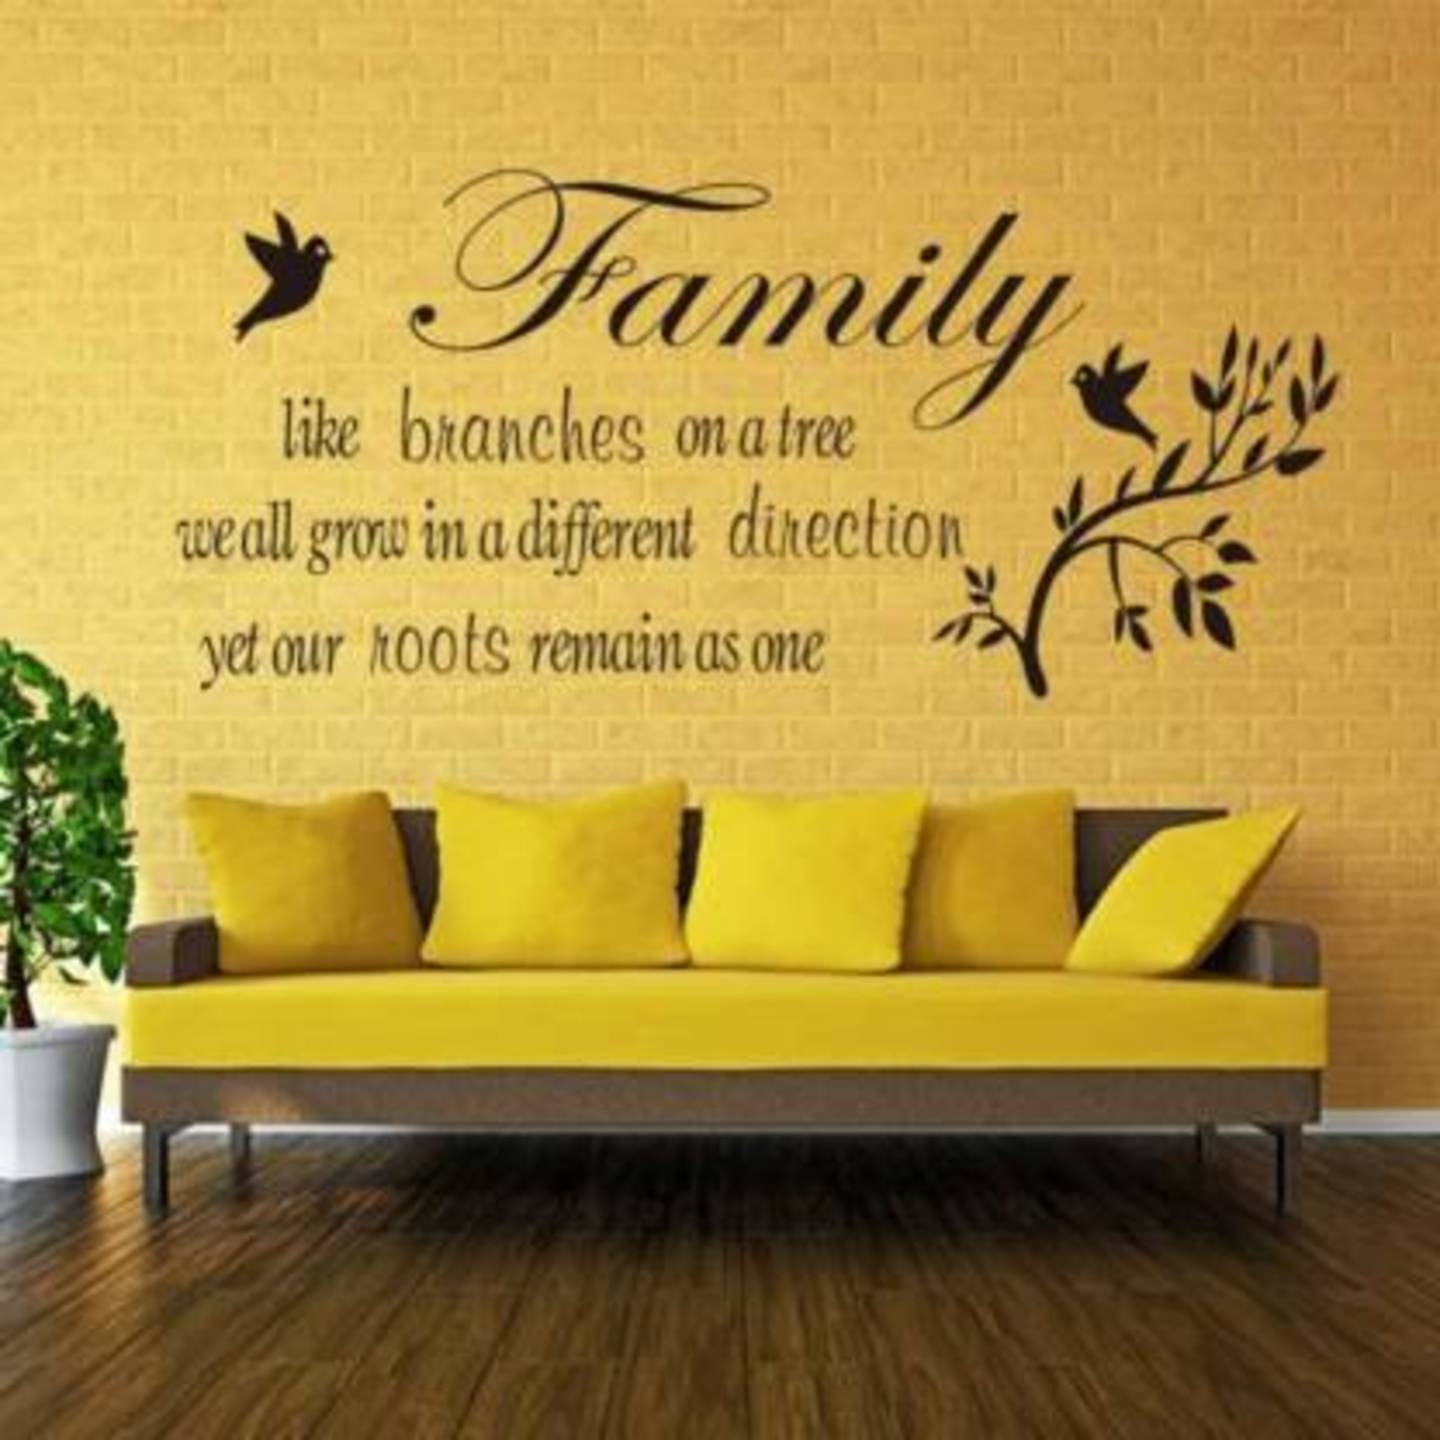 Family wording Wall Sticker